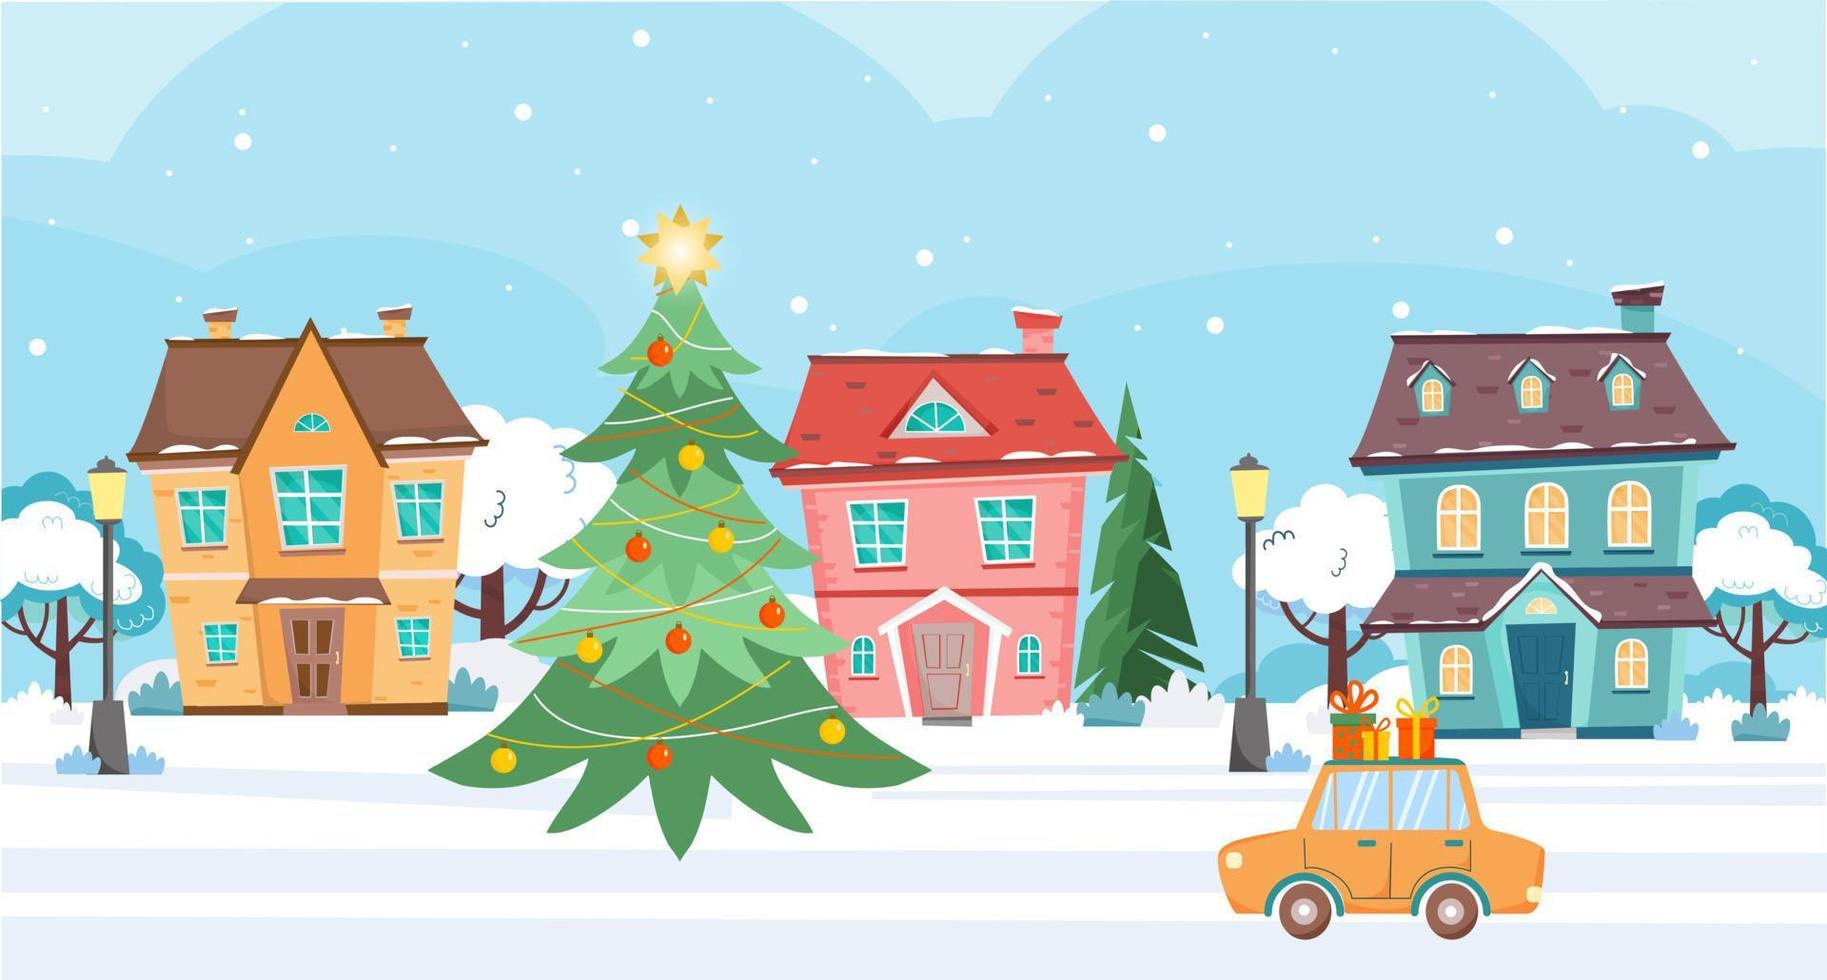 Cute houses at winter snow day. Car with fir tree and gift boxes drives down the street . Cottages, trees, street lamps, christmas tree, cars. Winter town at day time. Vector illustration.